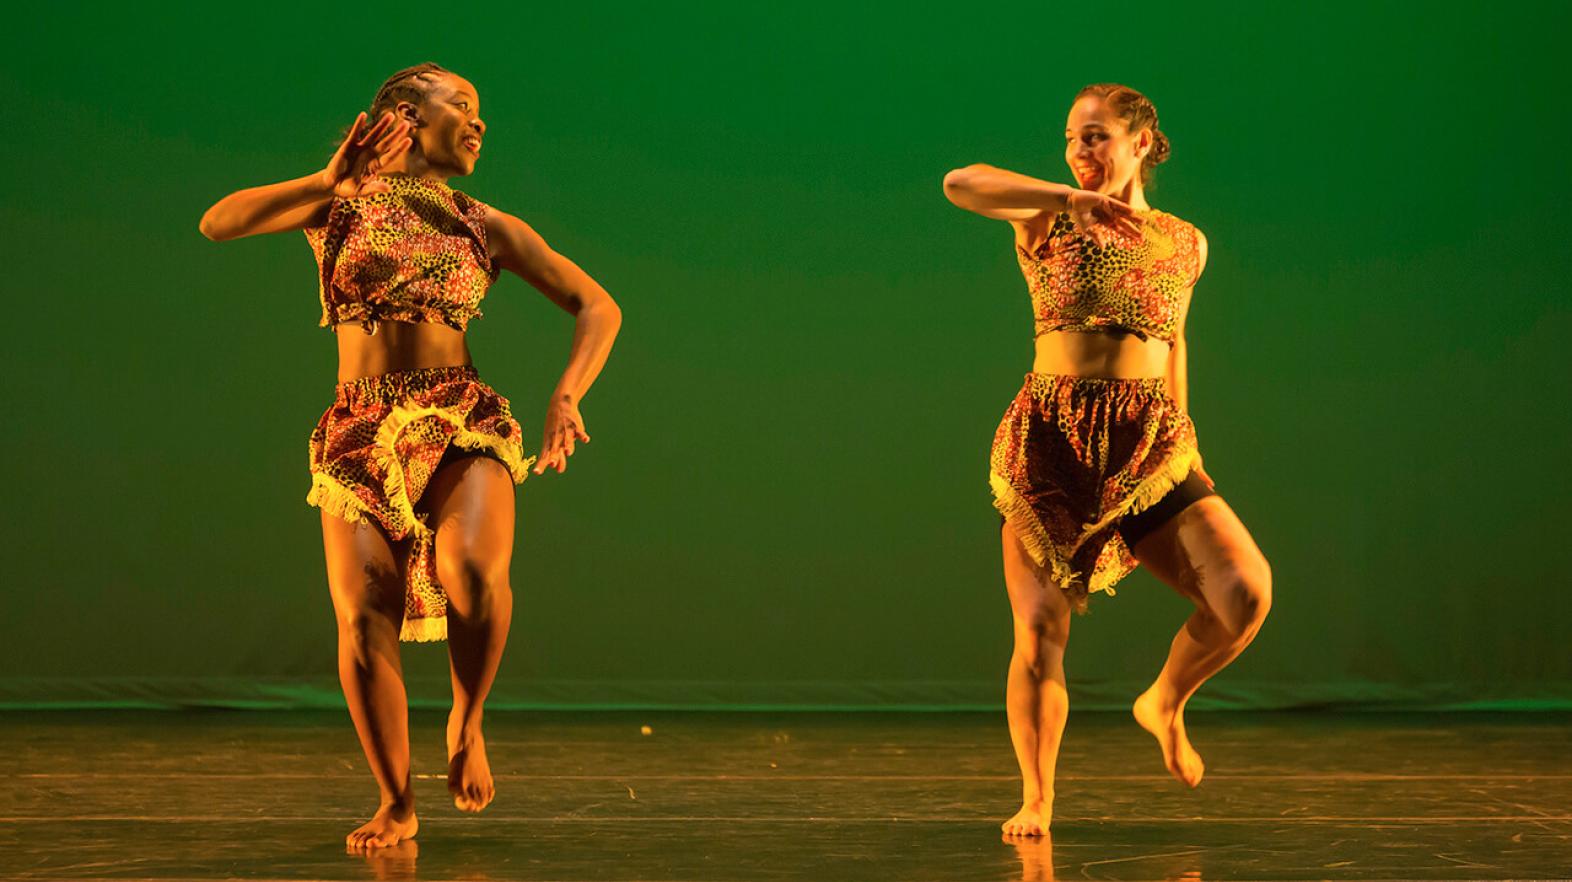 Two dancers perform an African Dance piece on stage